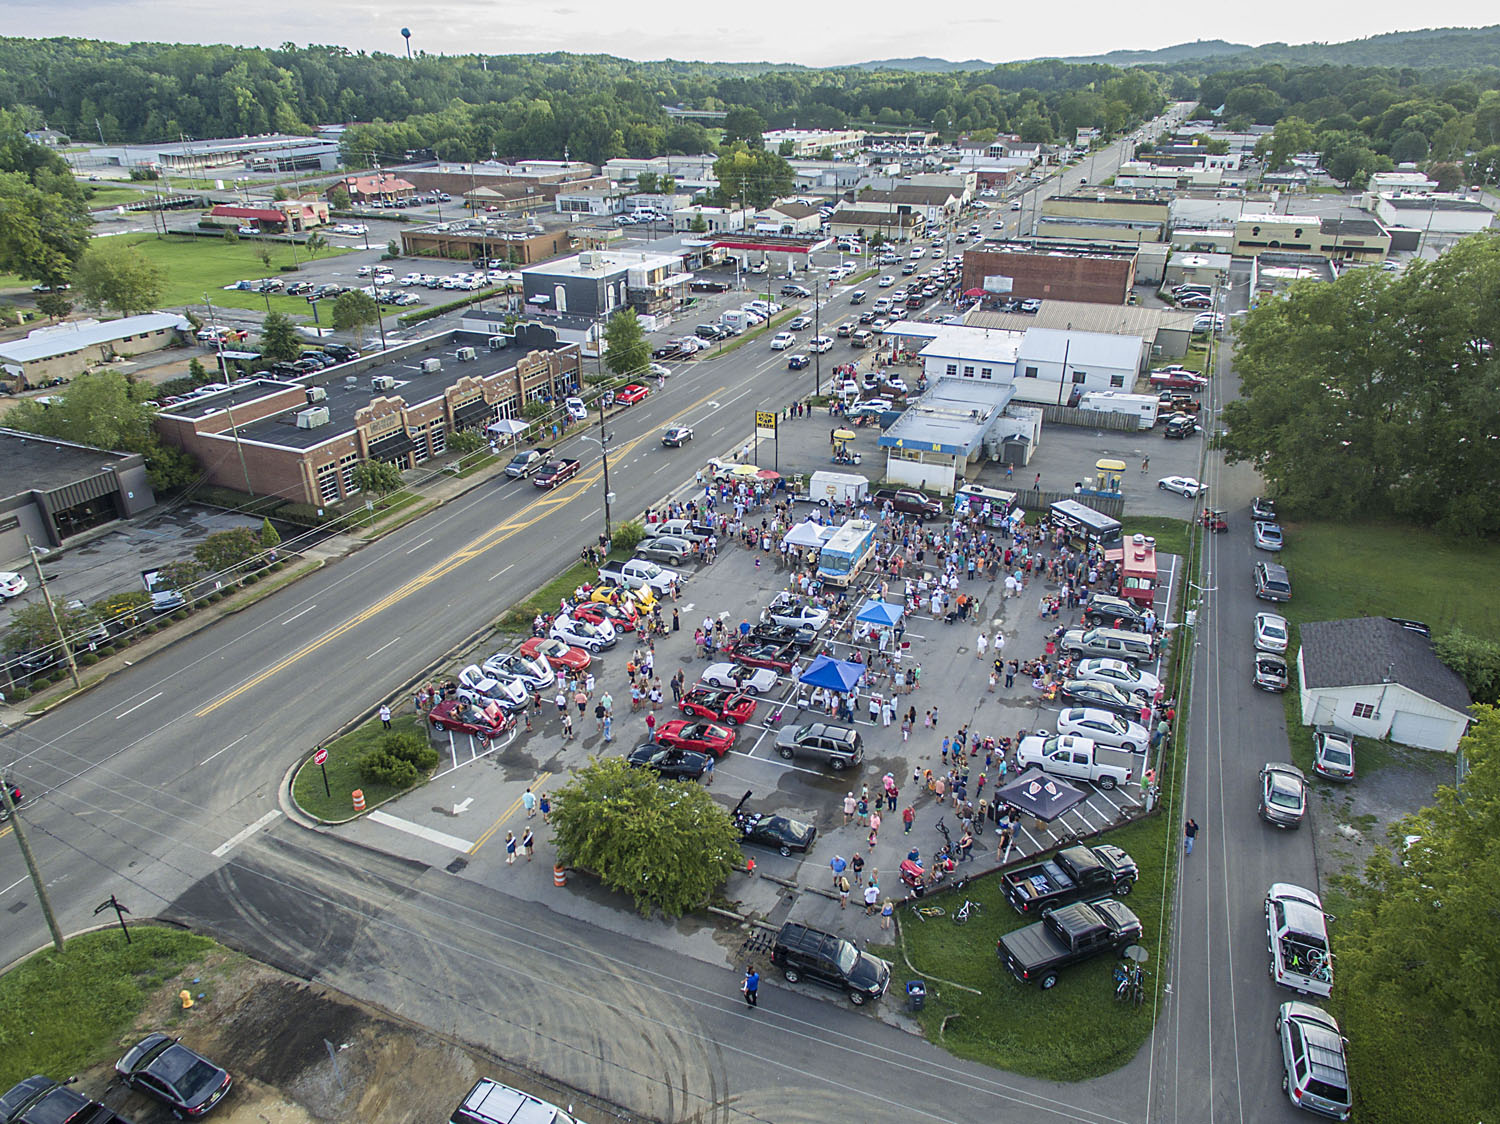 Trussville Downtown Merchant's Association block party set for Saturday featuring music and food trucks